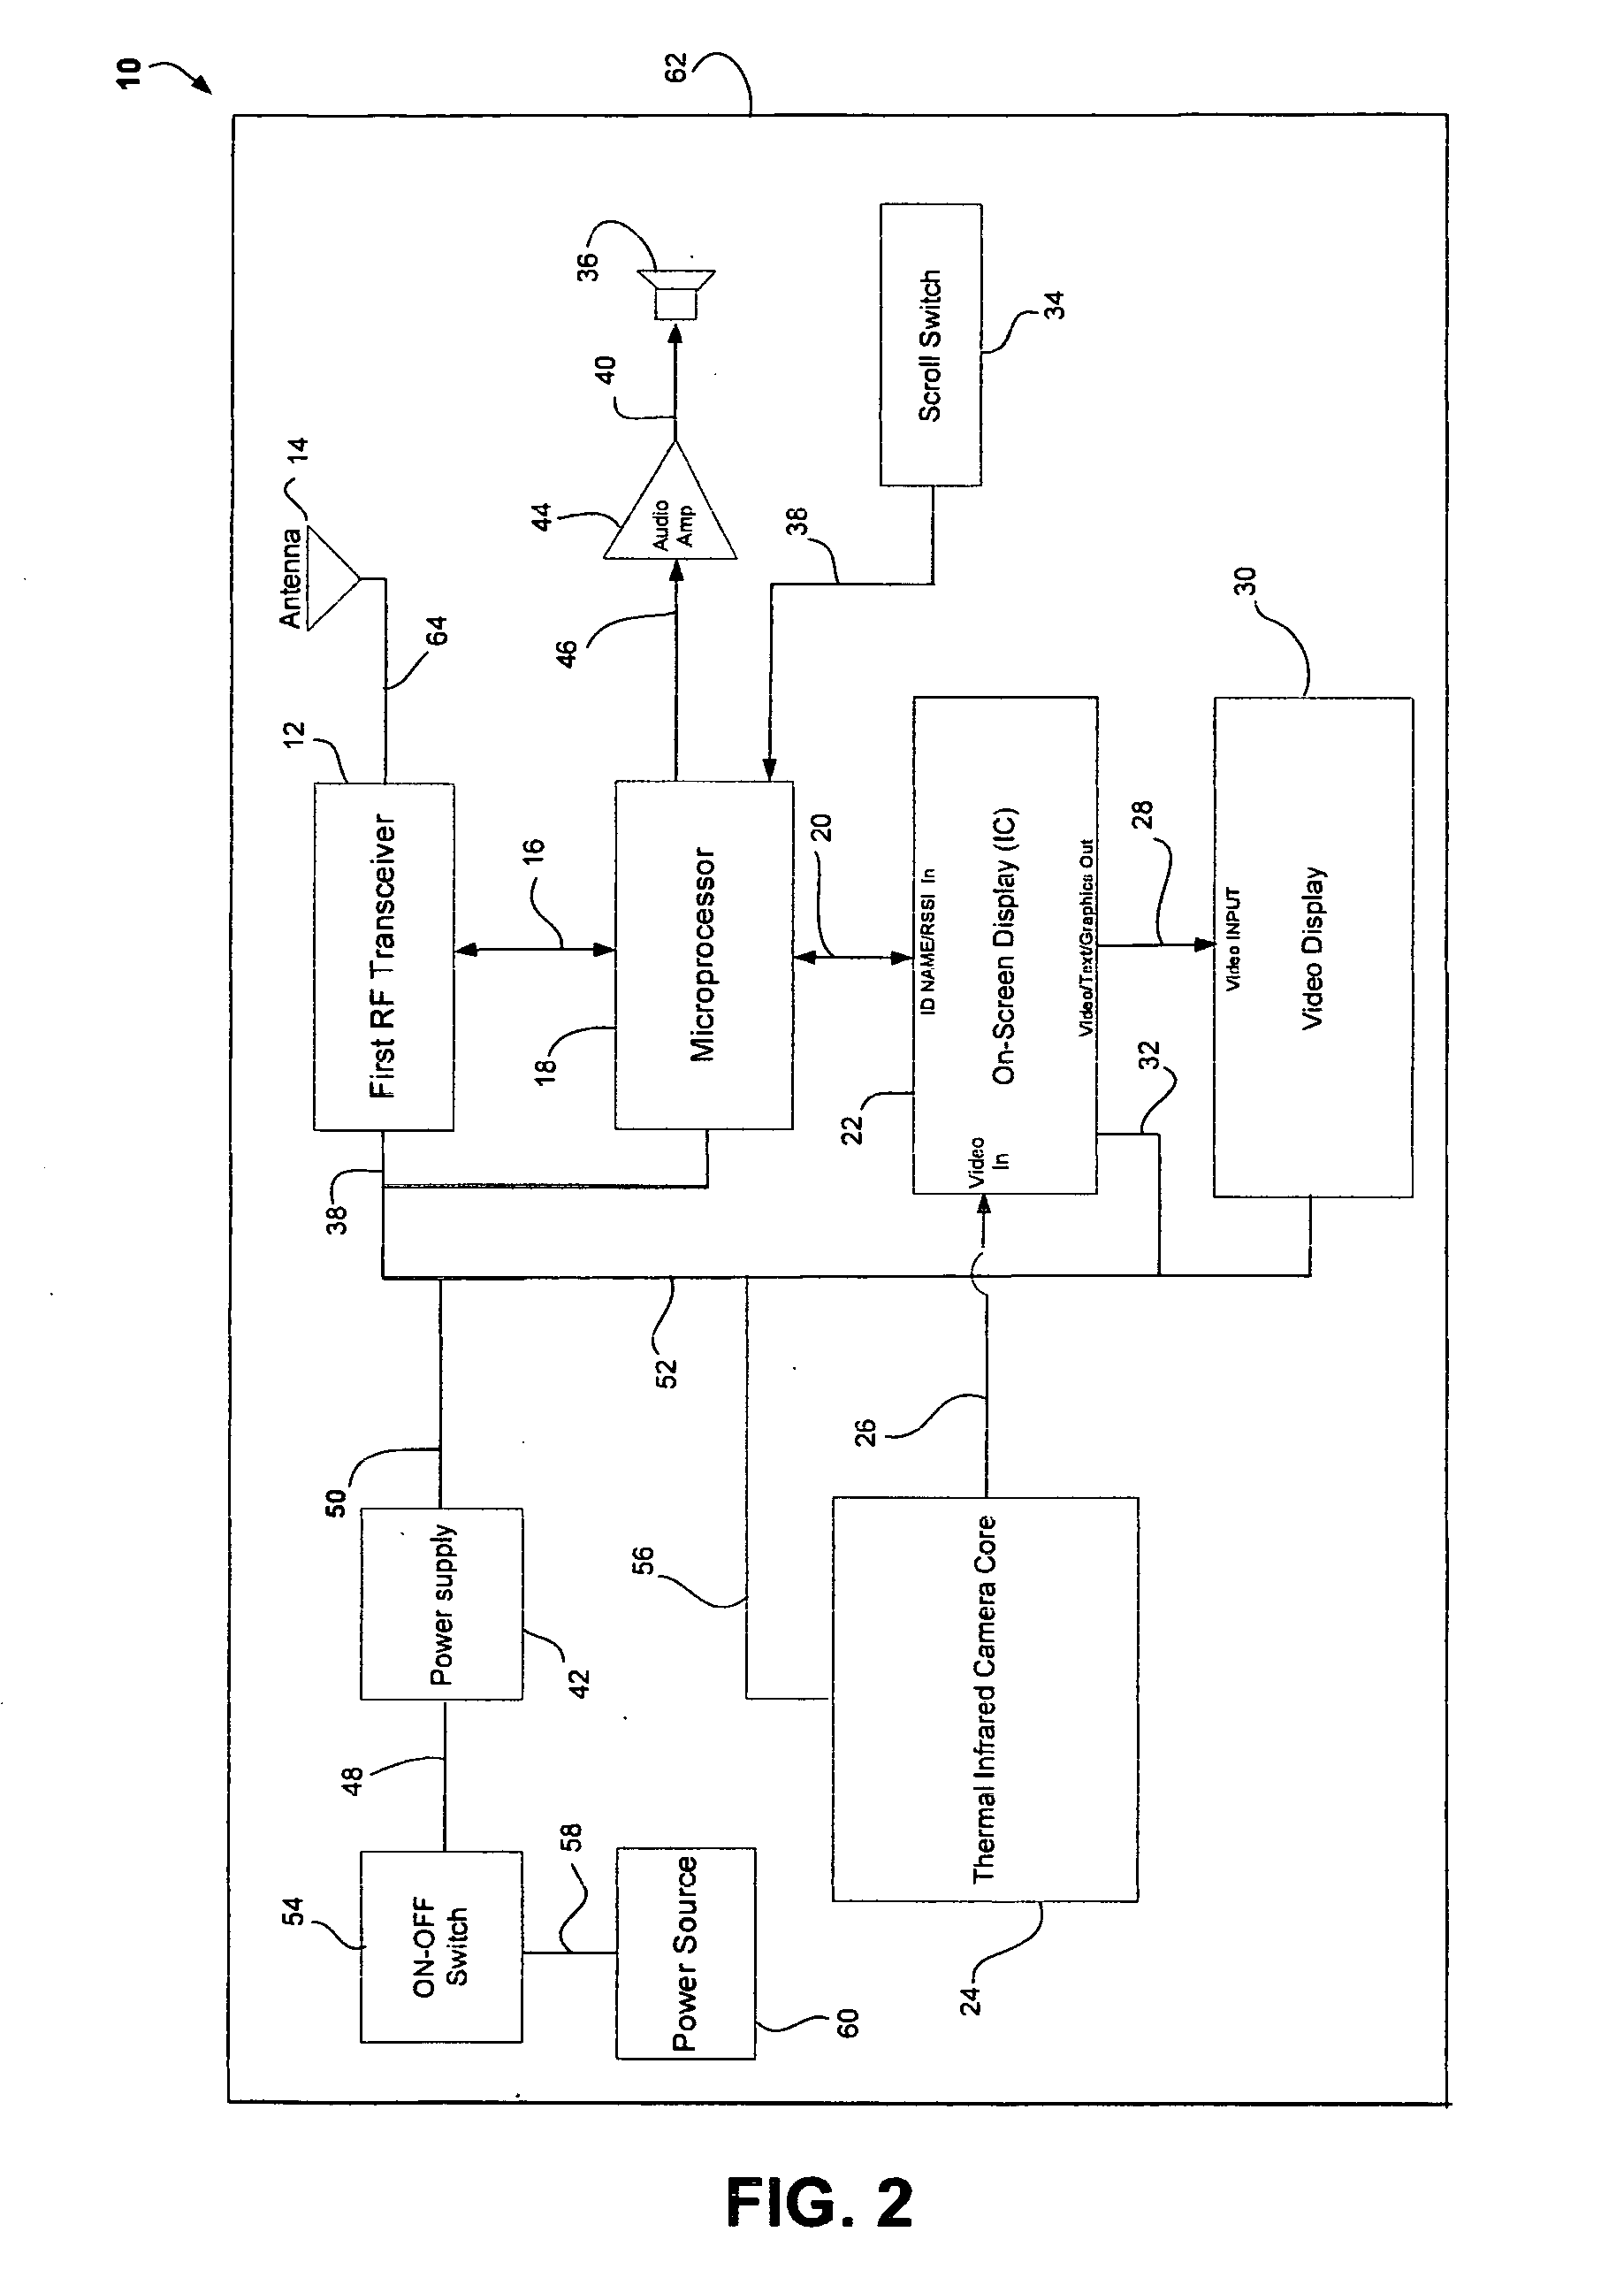 Thermal infrared camera tracking system utilizing receive signal strength